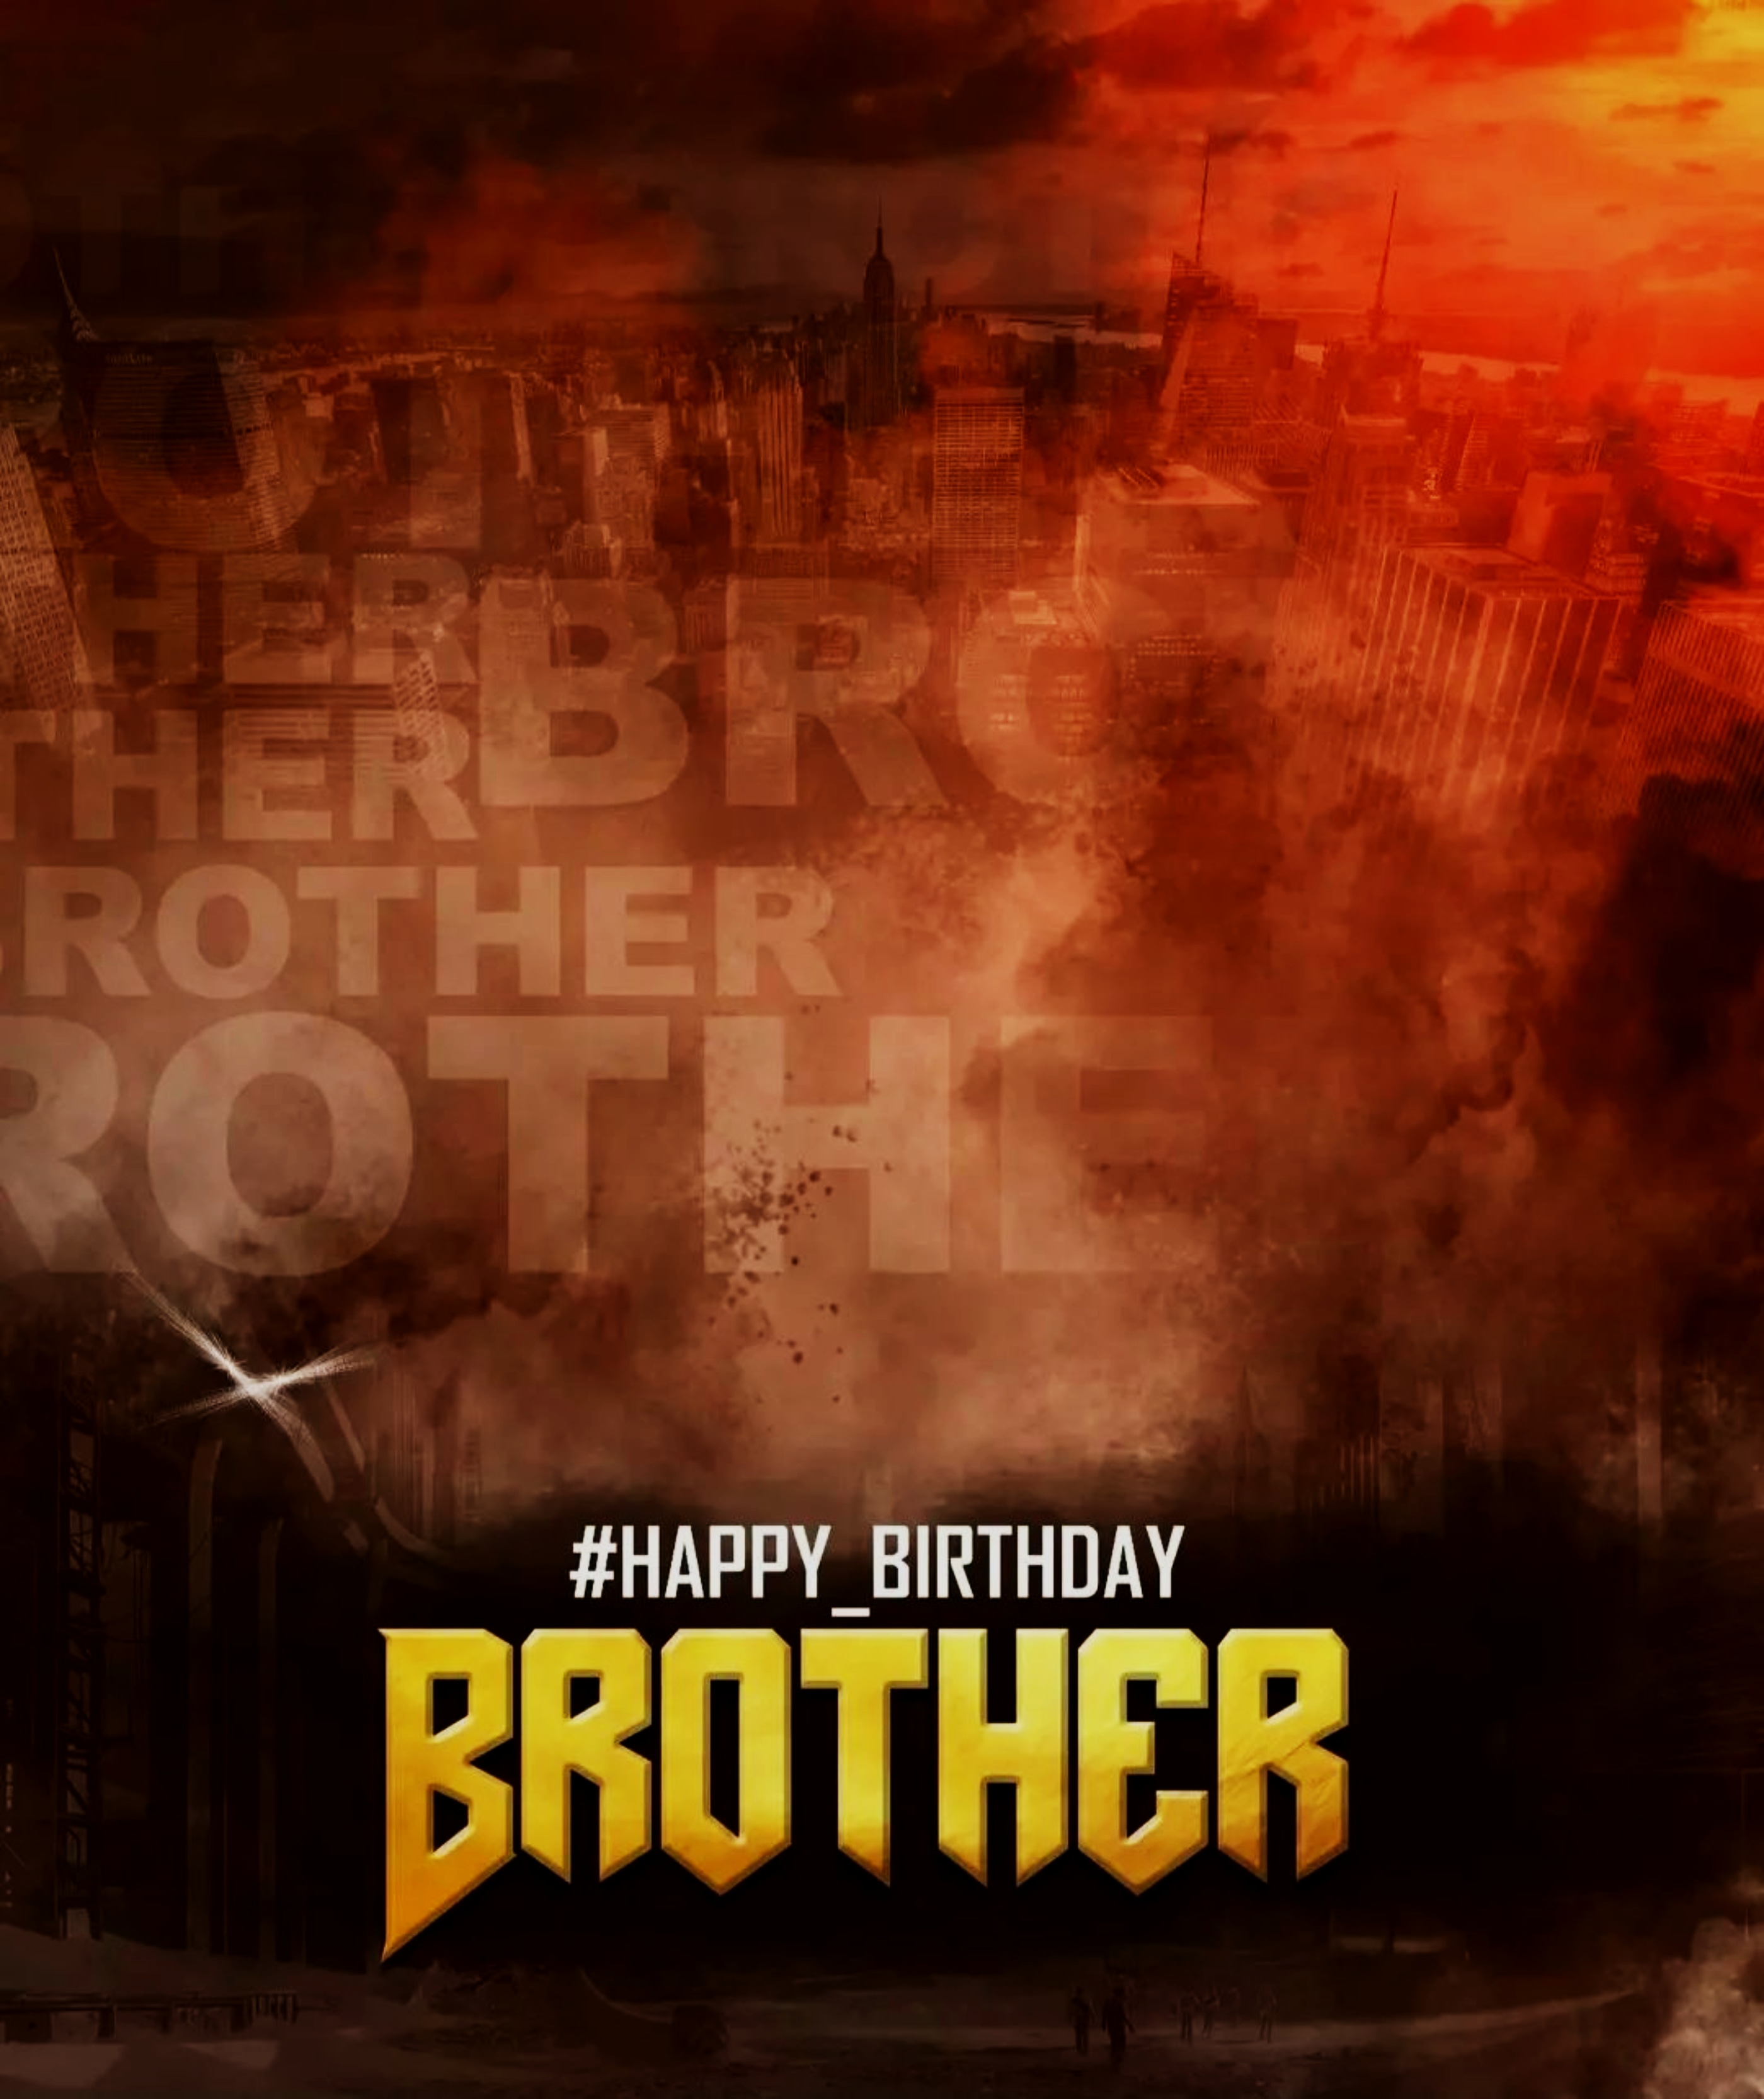 You are currently viewing Happy birthday brother image download for editing free